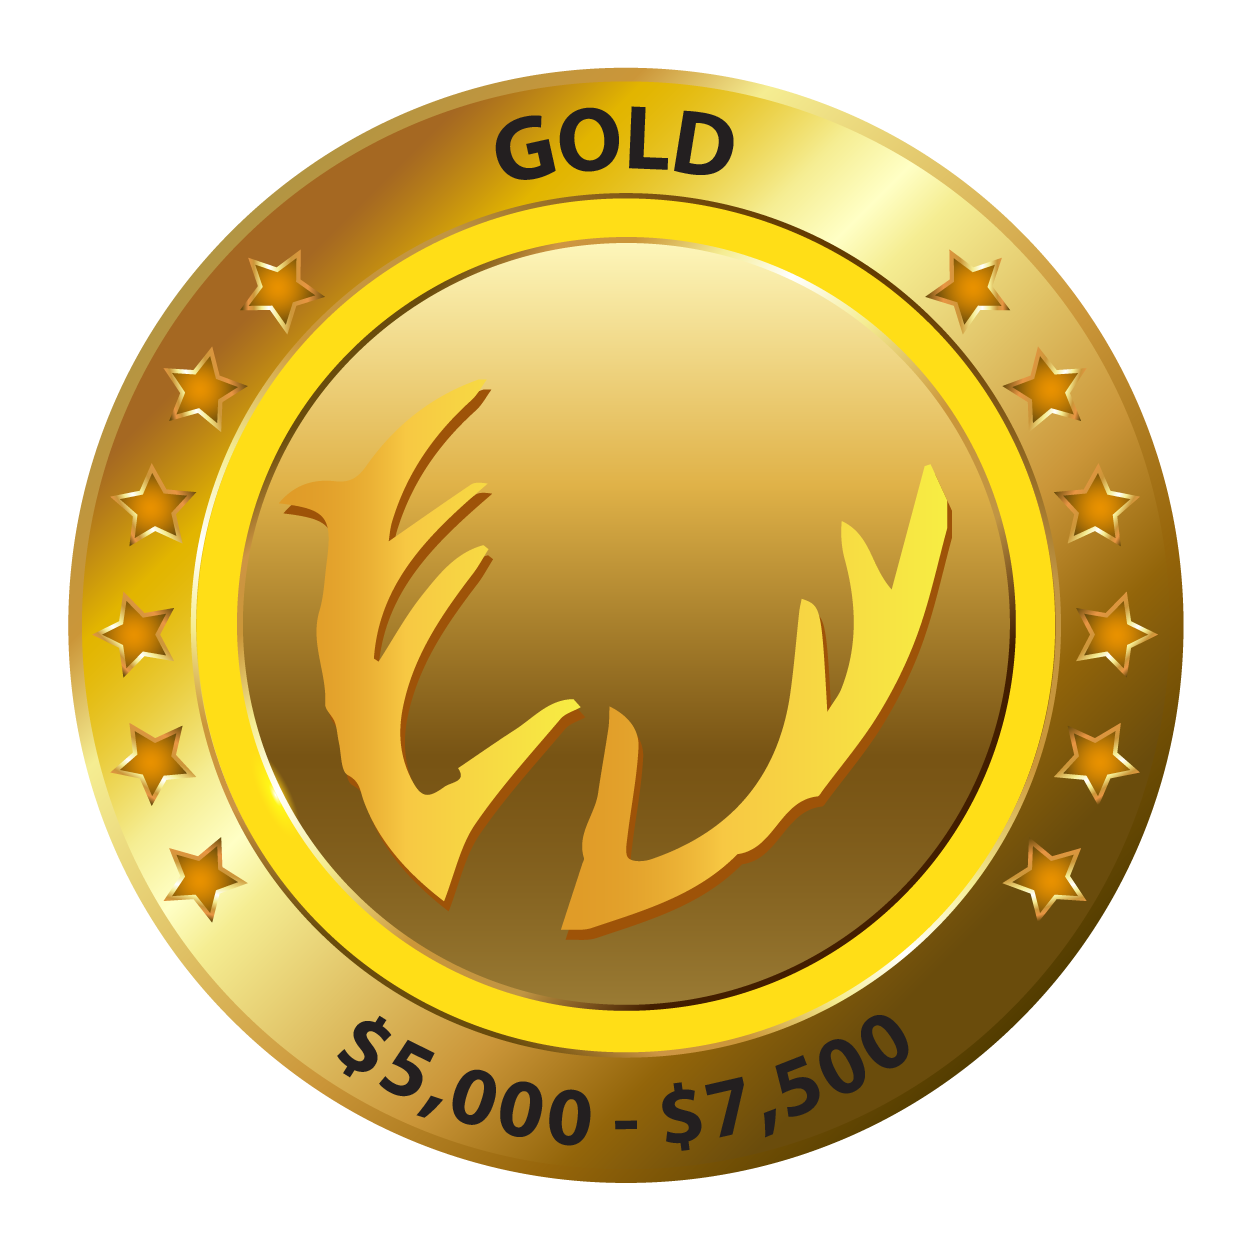 Gold price level $5,000 to $7,500